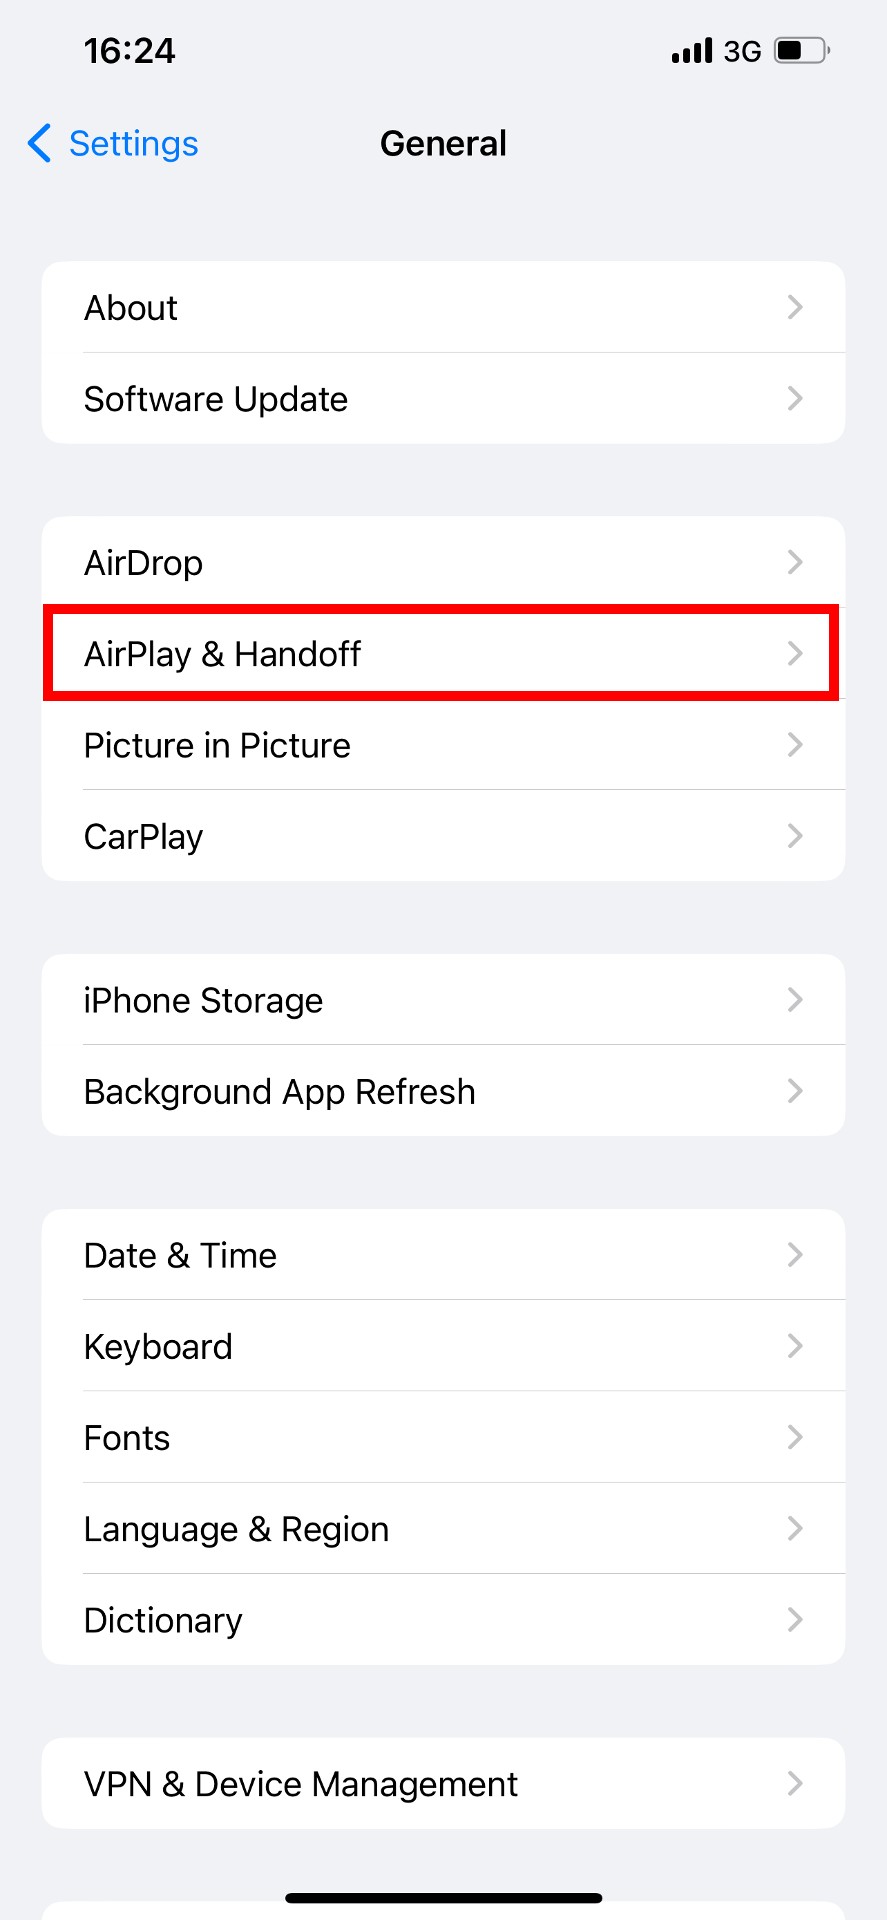 iOS general settings with "AirPlay & Handoff" highlighted